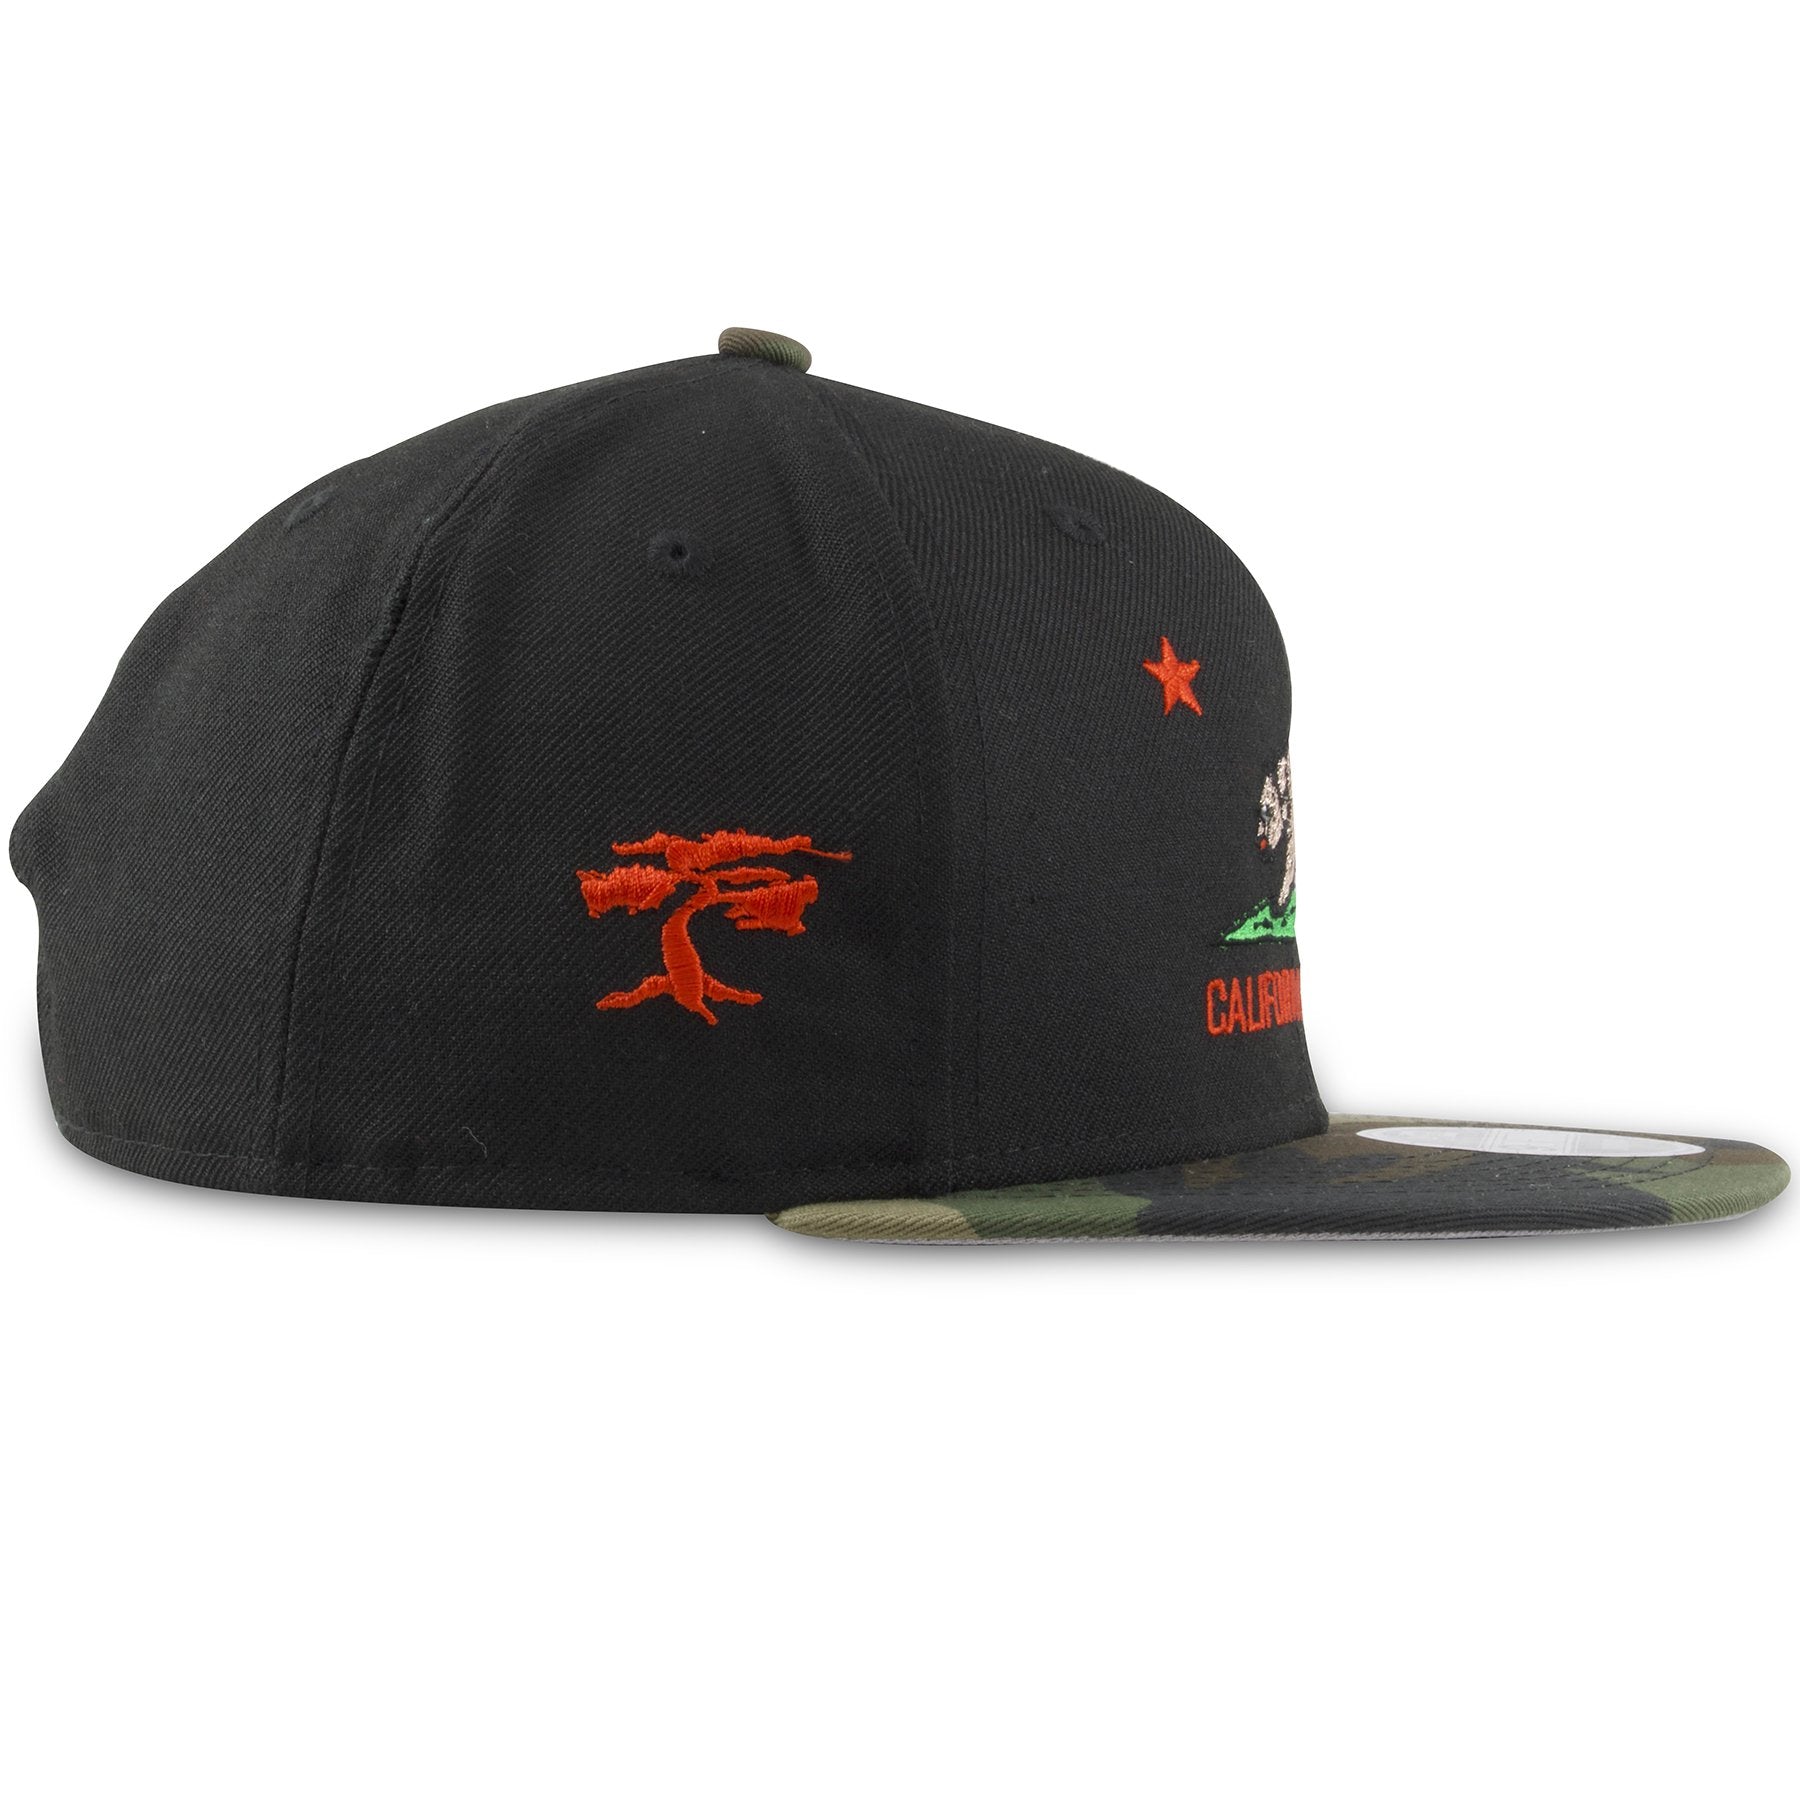 On the left side of the California Republic black on camouflage snapback hat is the Foot Clan bonsai tree logo embroidered in red